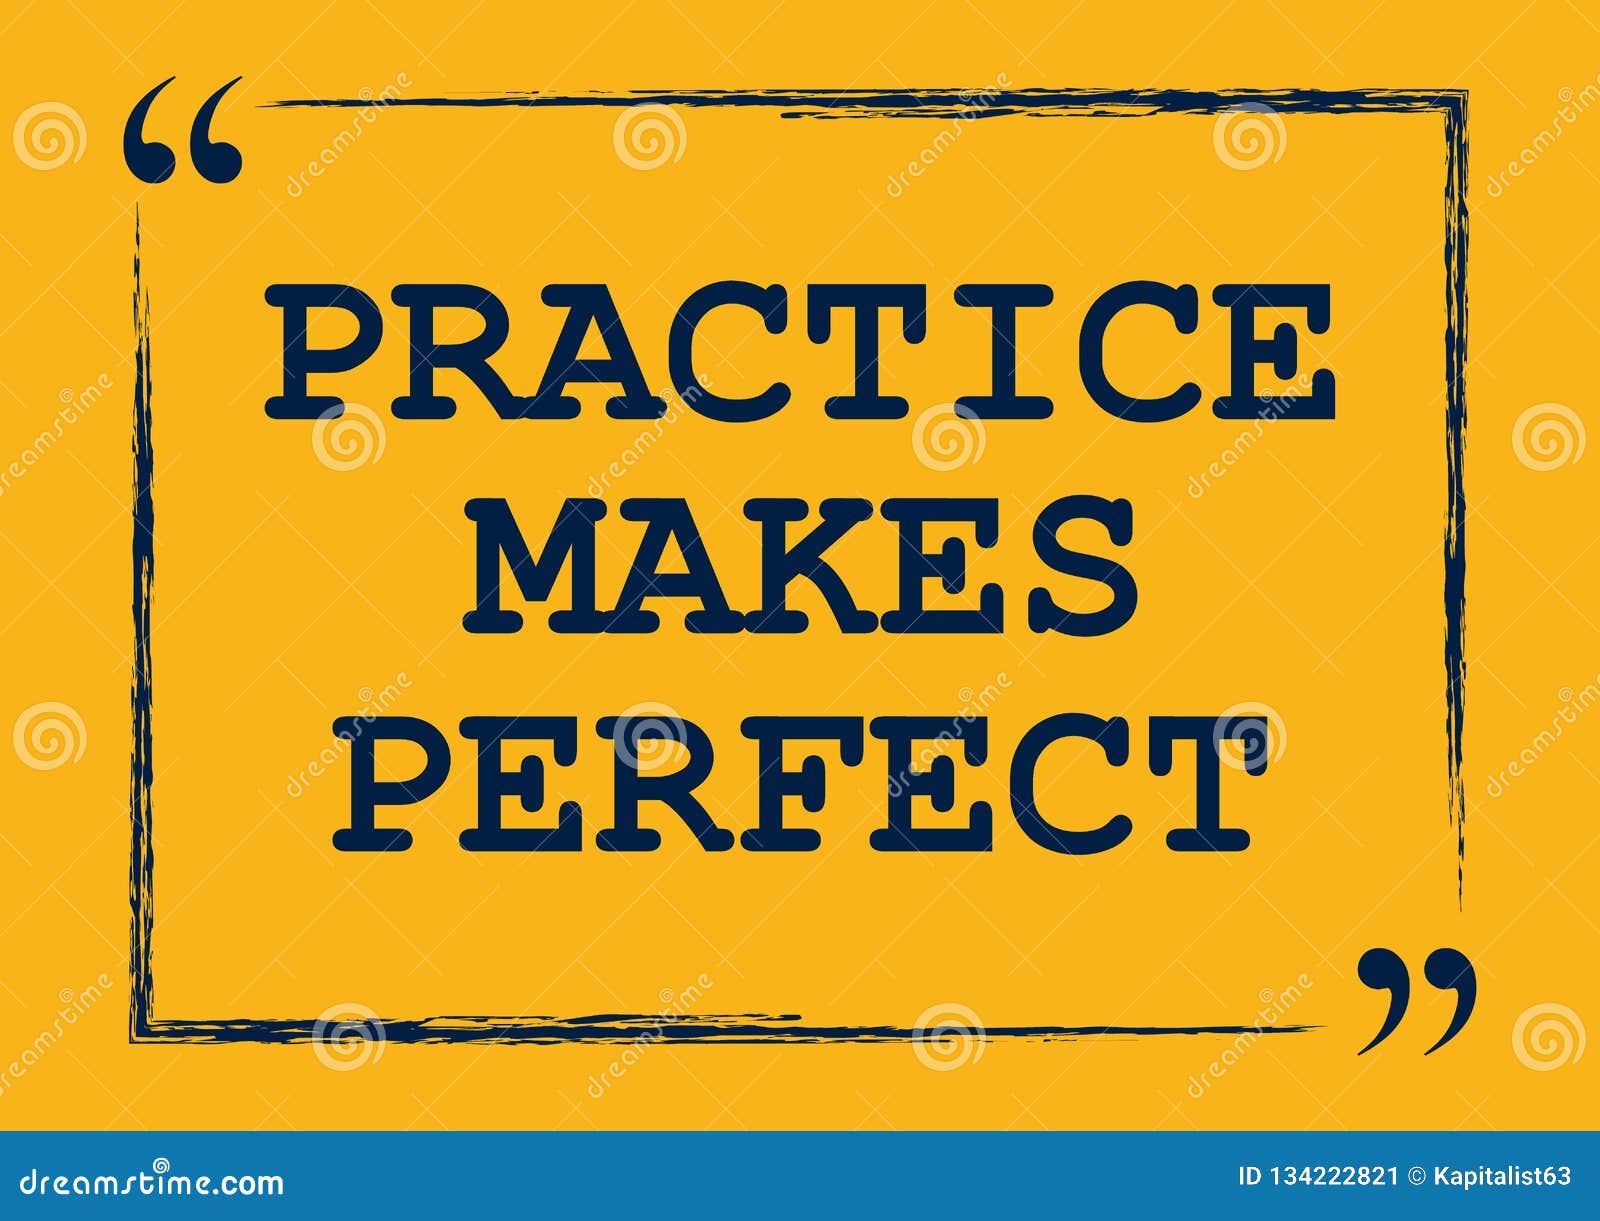 Practice Makes Perfect Or Something ðŸ˜�